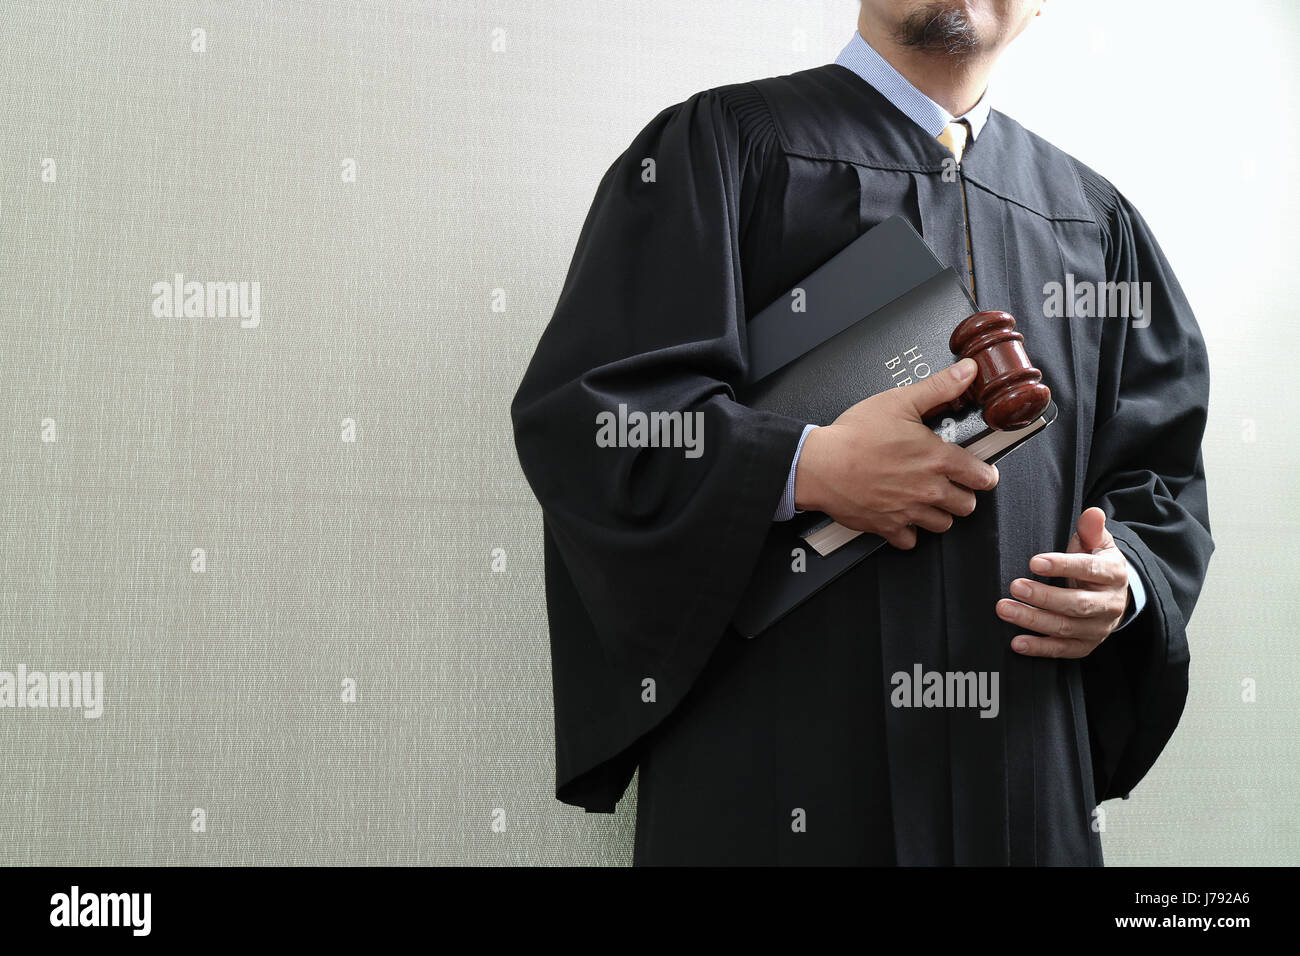 justice and law concept.Male judge in a courtroom with the gaveland holy book and digital tablet computer Stock Photo